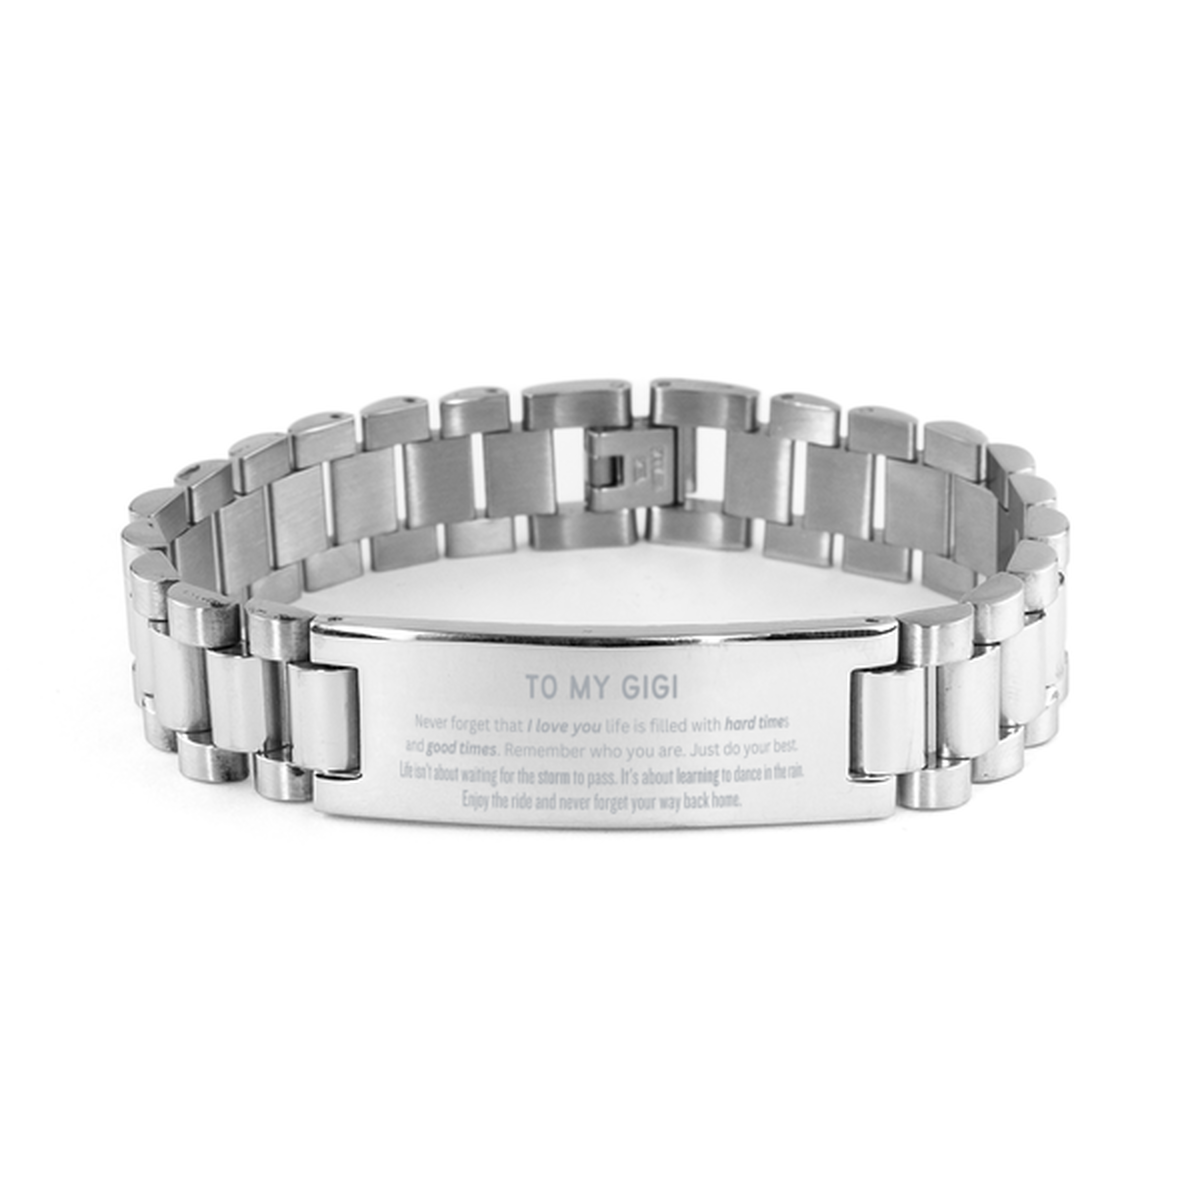 Christmas Gigi Ladder Stainless Steel Bracelet Gifts, To My Gigi Birthday Thank You Gifts For Gigi, Graduation Unique Gifts For Gigi To My Gigi Never forget that I love you life is filled with hard times and good times. Remember who you are. Just do your